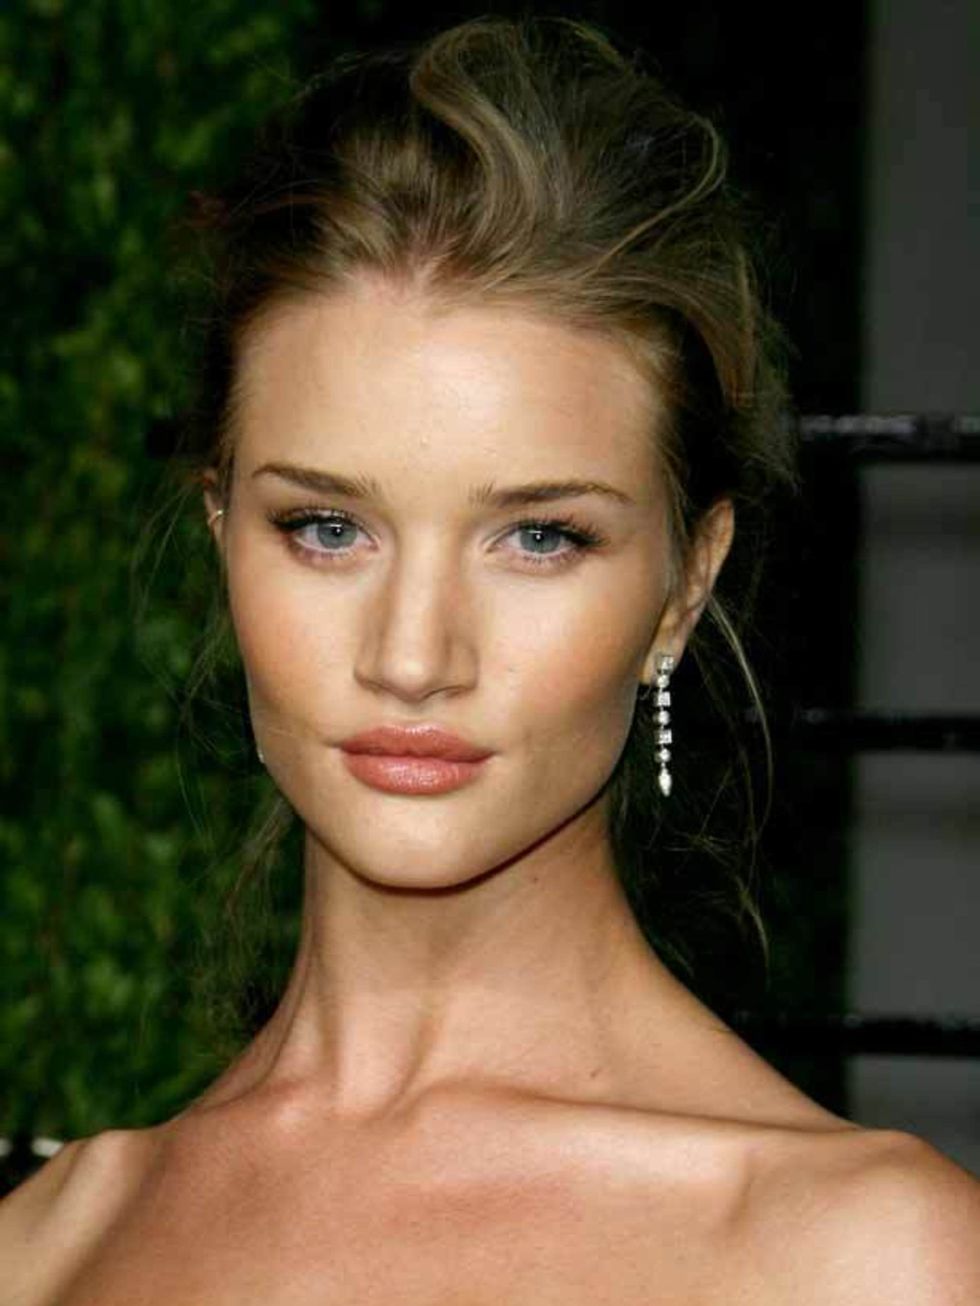 <p><a href="http://www.elleuk.com/starstyle/style-files/%28section%29/rosie-huntington-whiteley/%28offset%29/0/%28img%29/364028">Rosie Huntington-Whiteley at the 2011 Oscars</a></p>